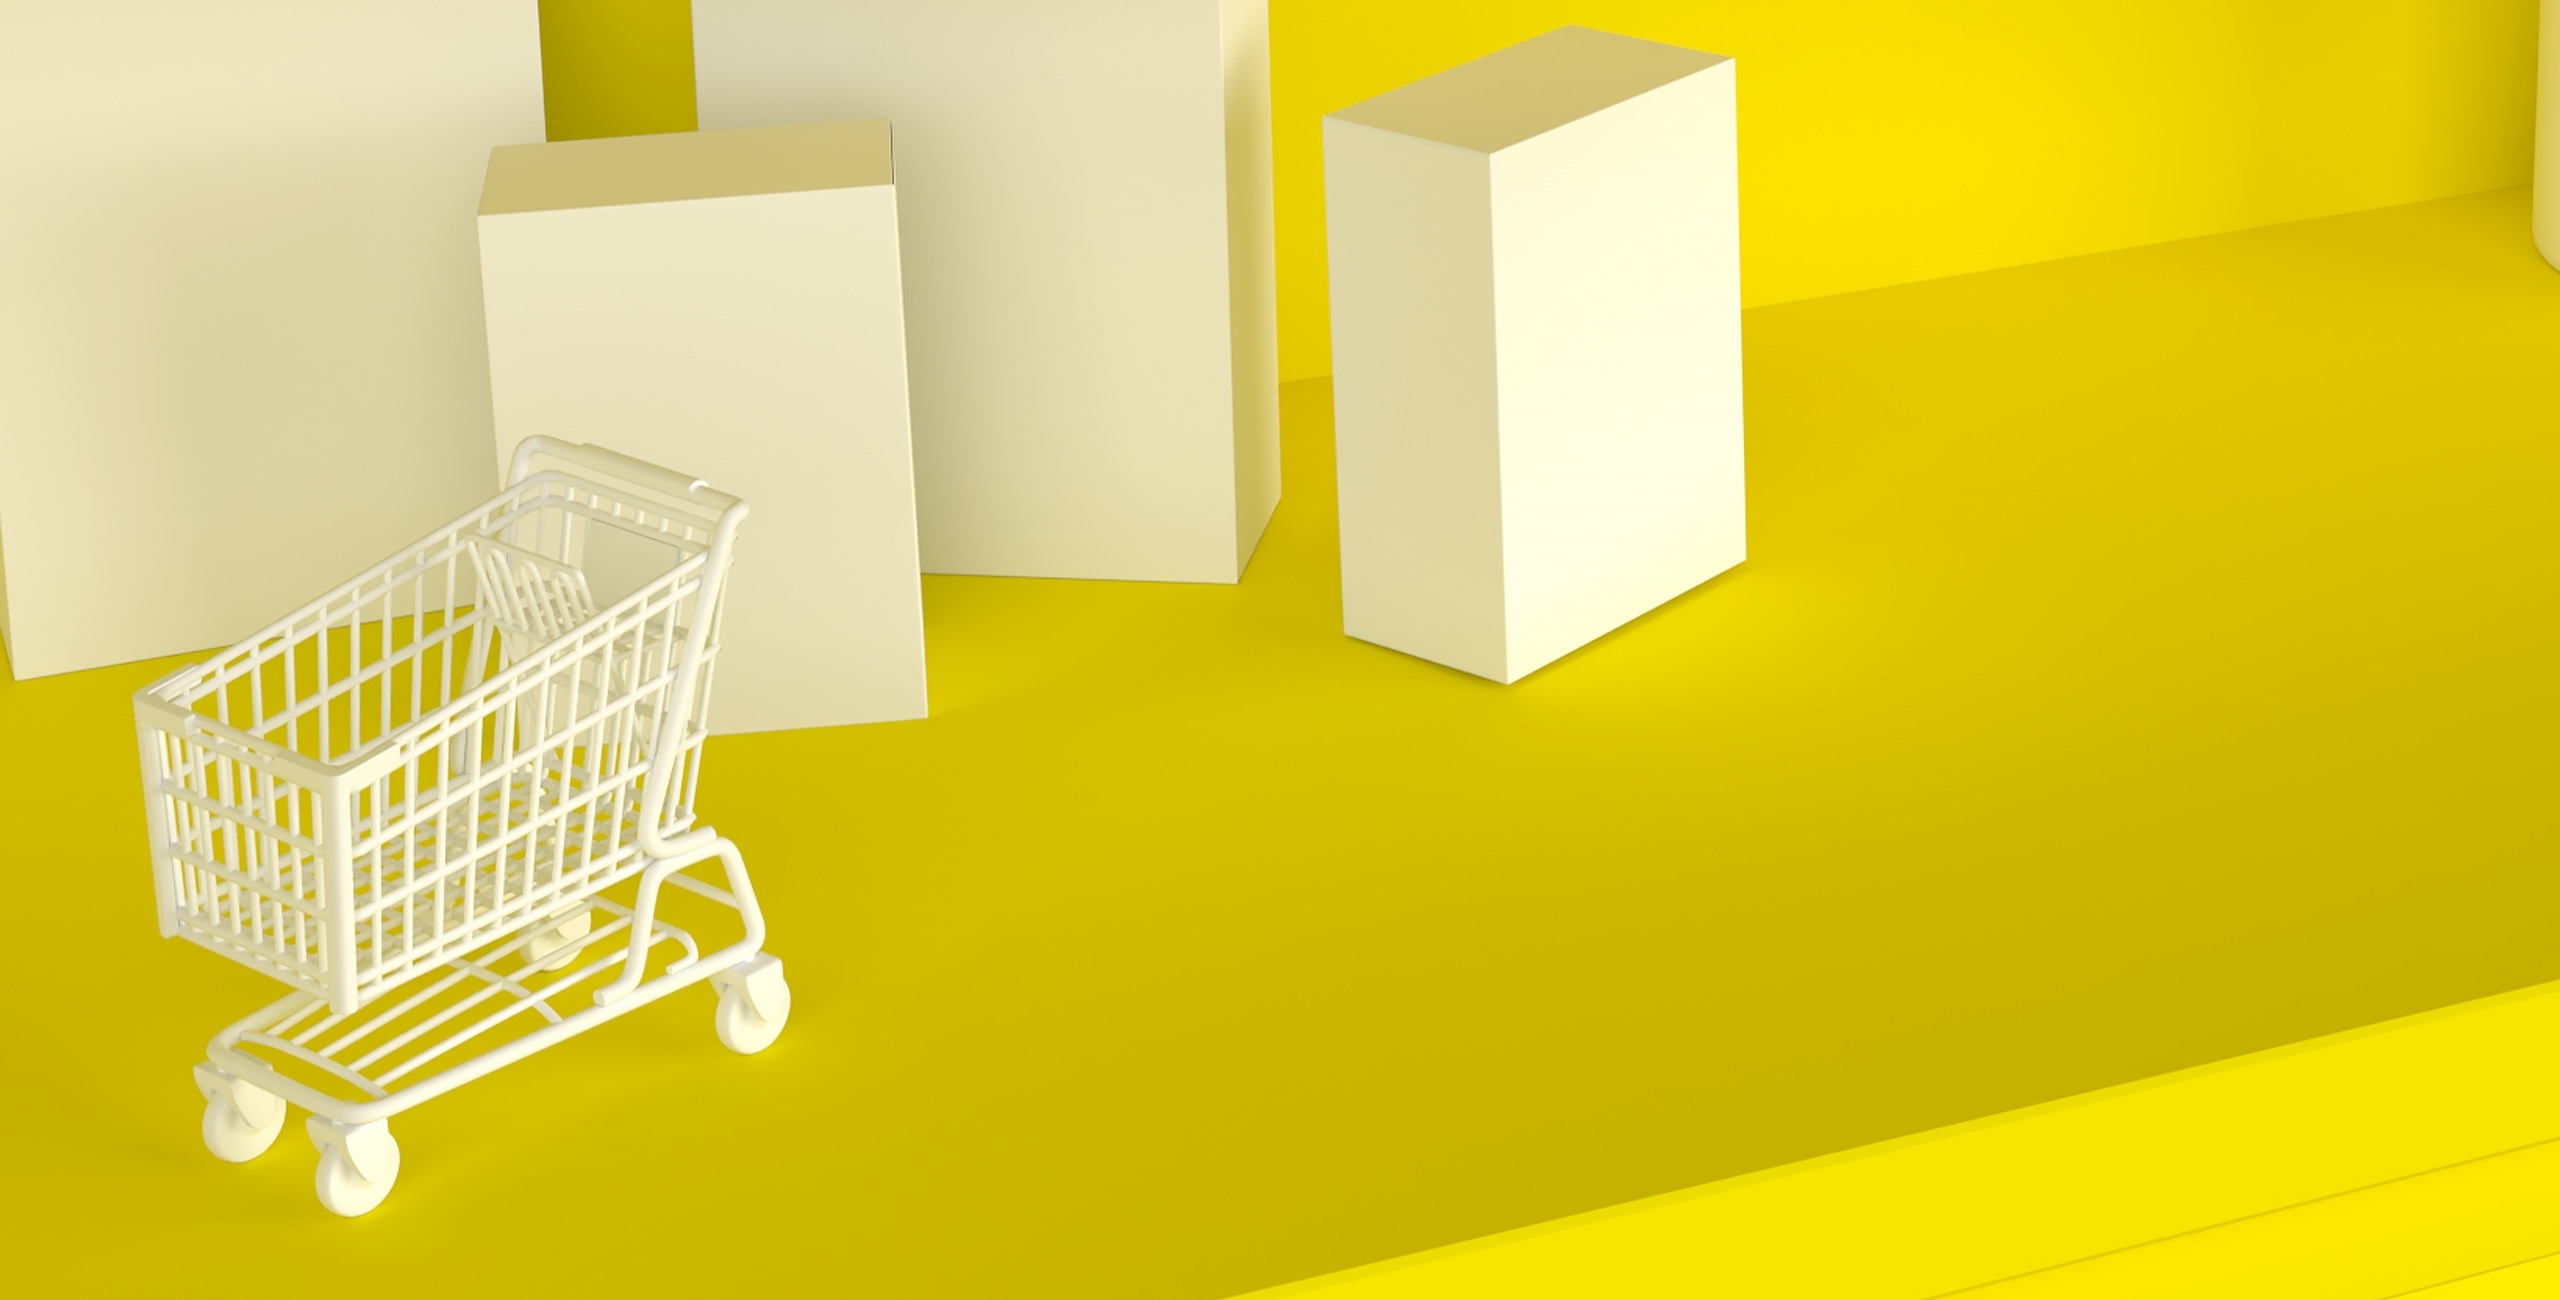 A shopping cart on a yellow background.